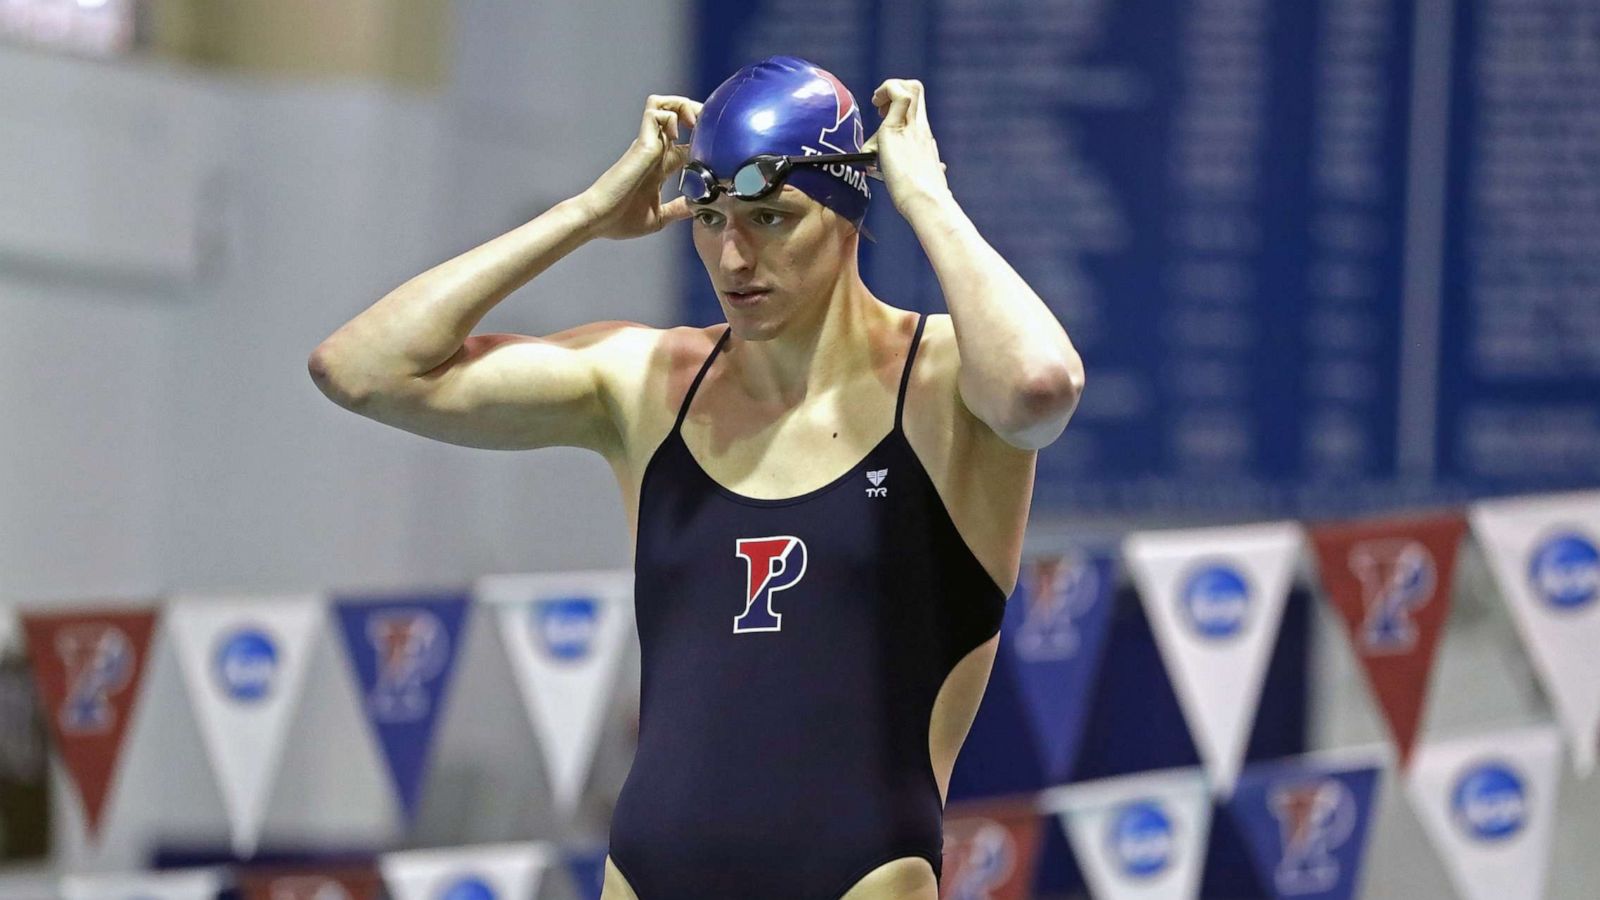 Transgender swimmer Lia Thomas speaks out about backlash, future